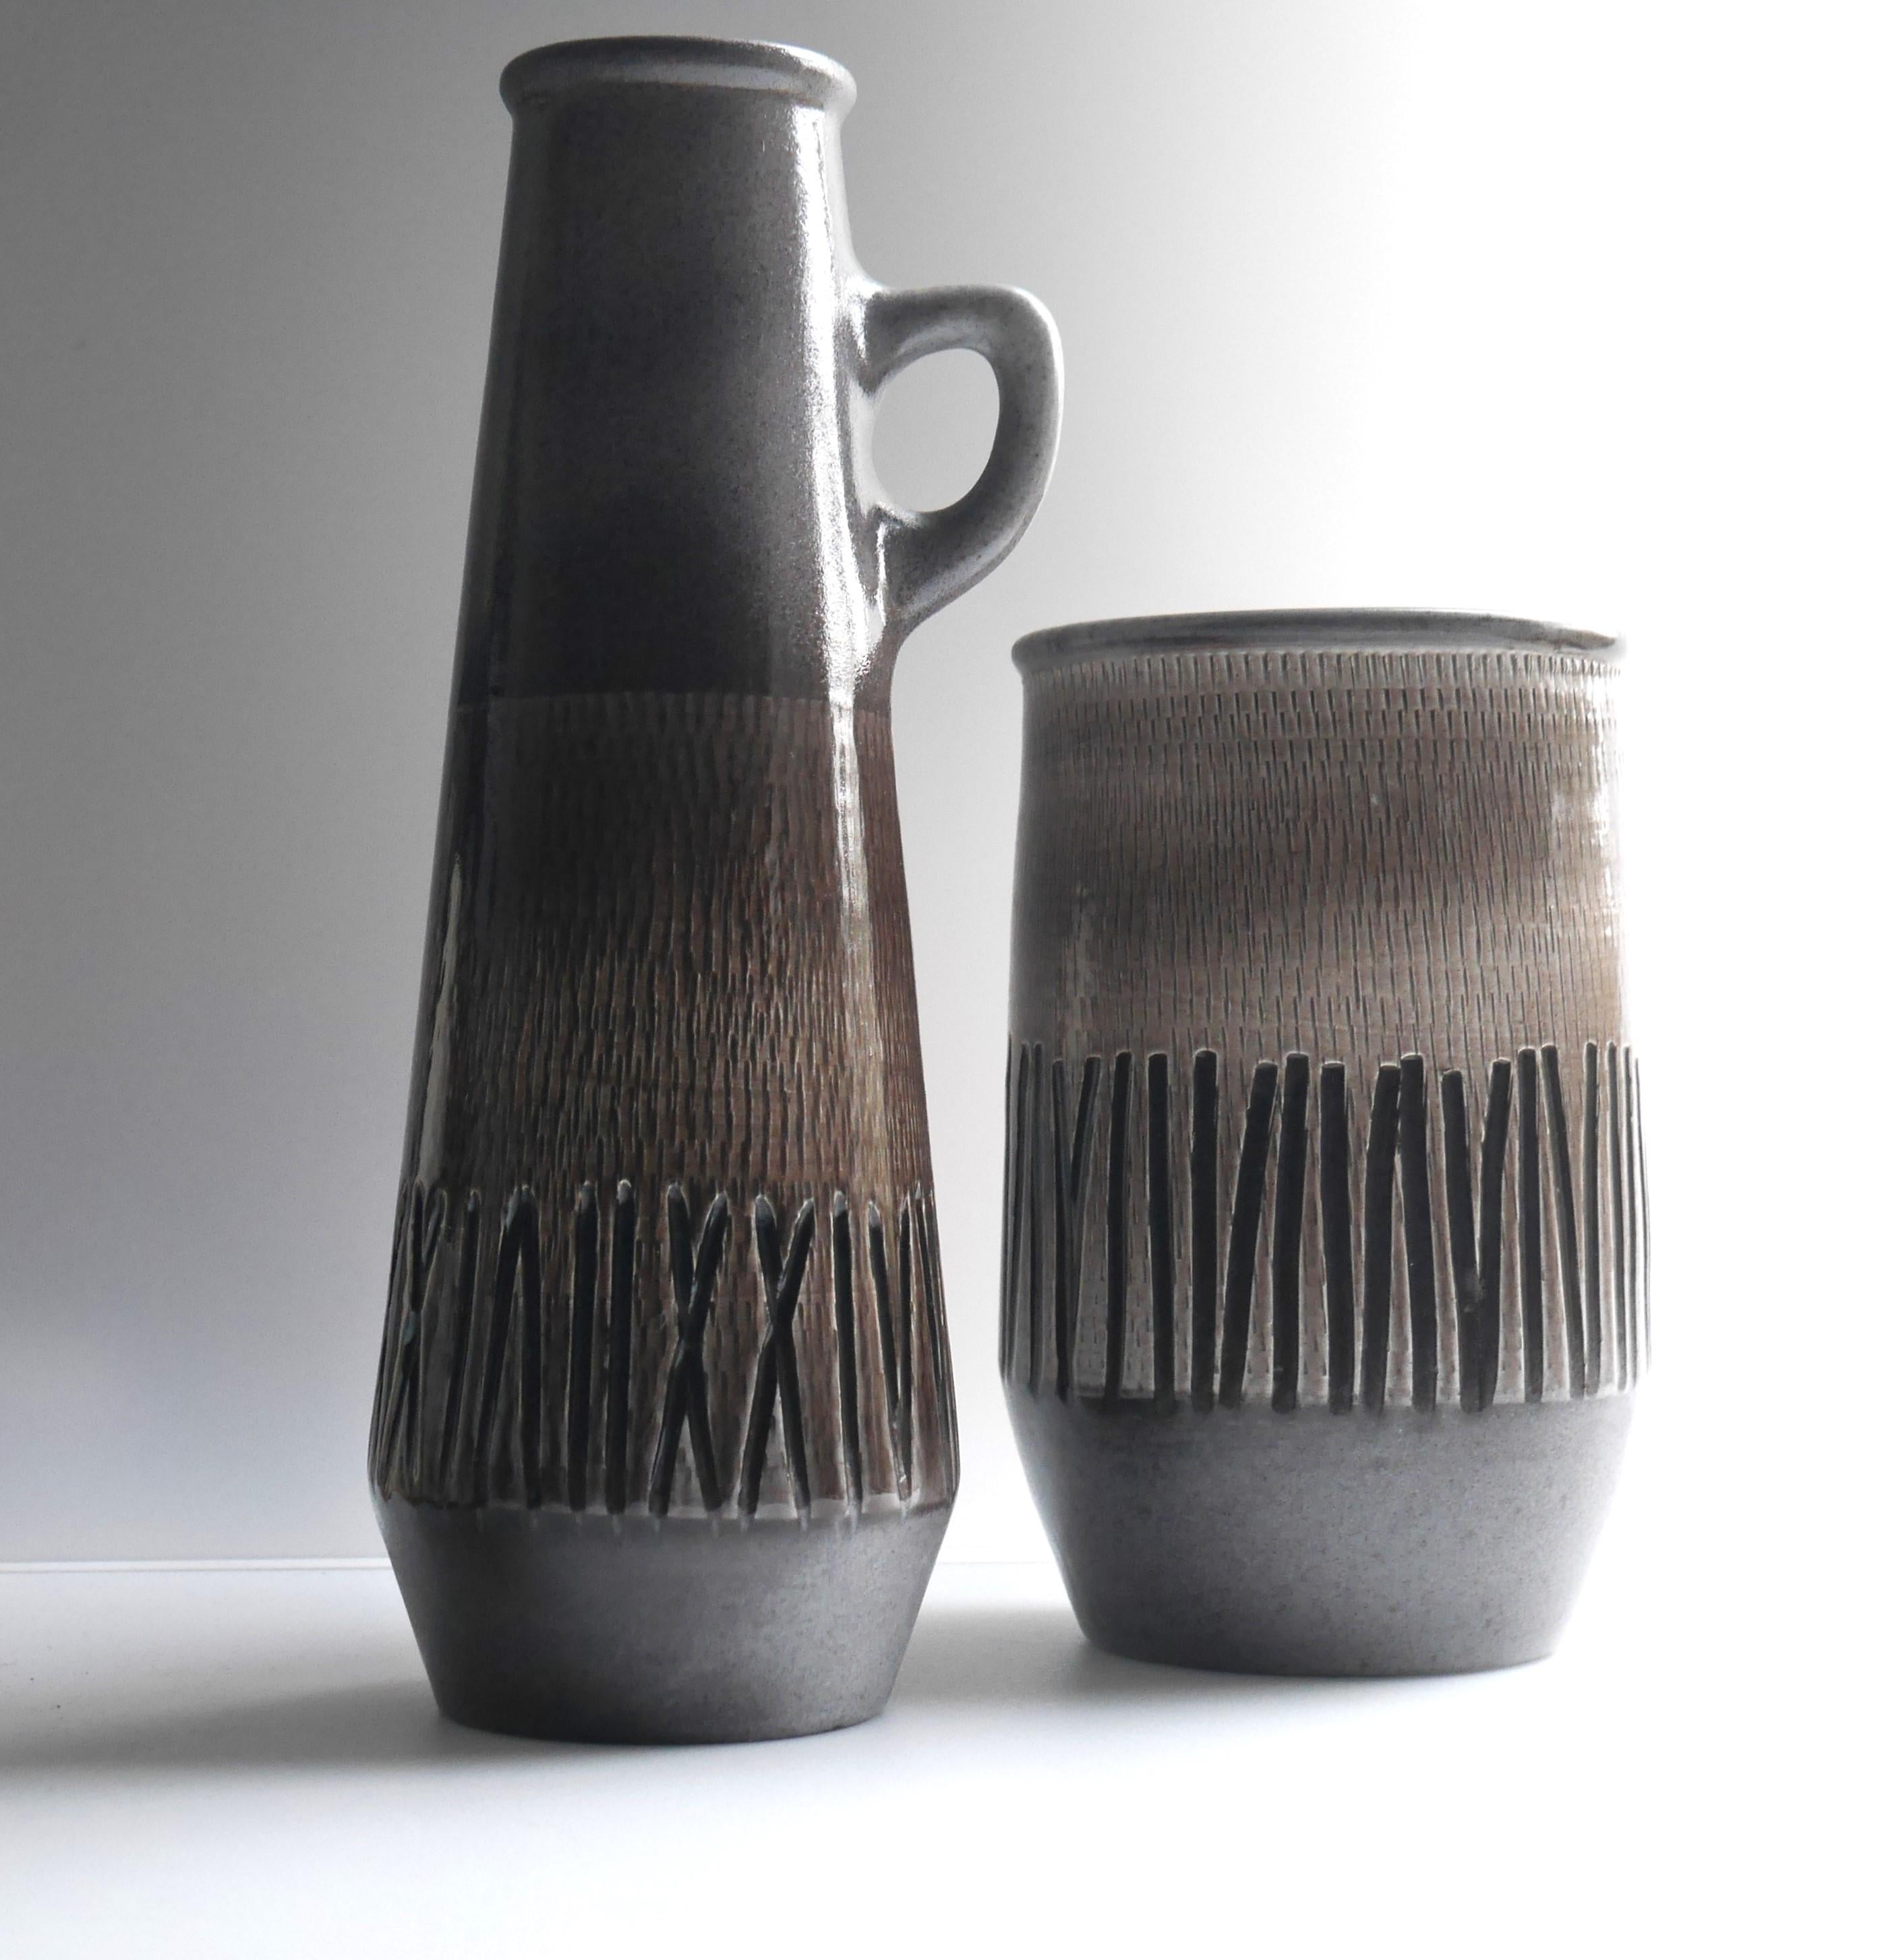 A pair of great vases, by Ingrid Atterberg for Upsala Ekeby. The design is known as 